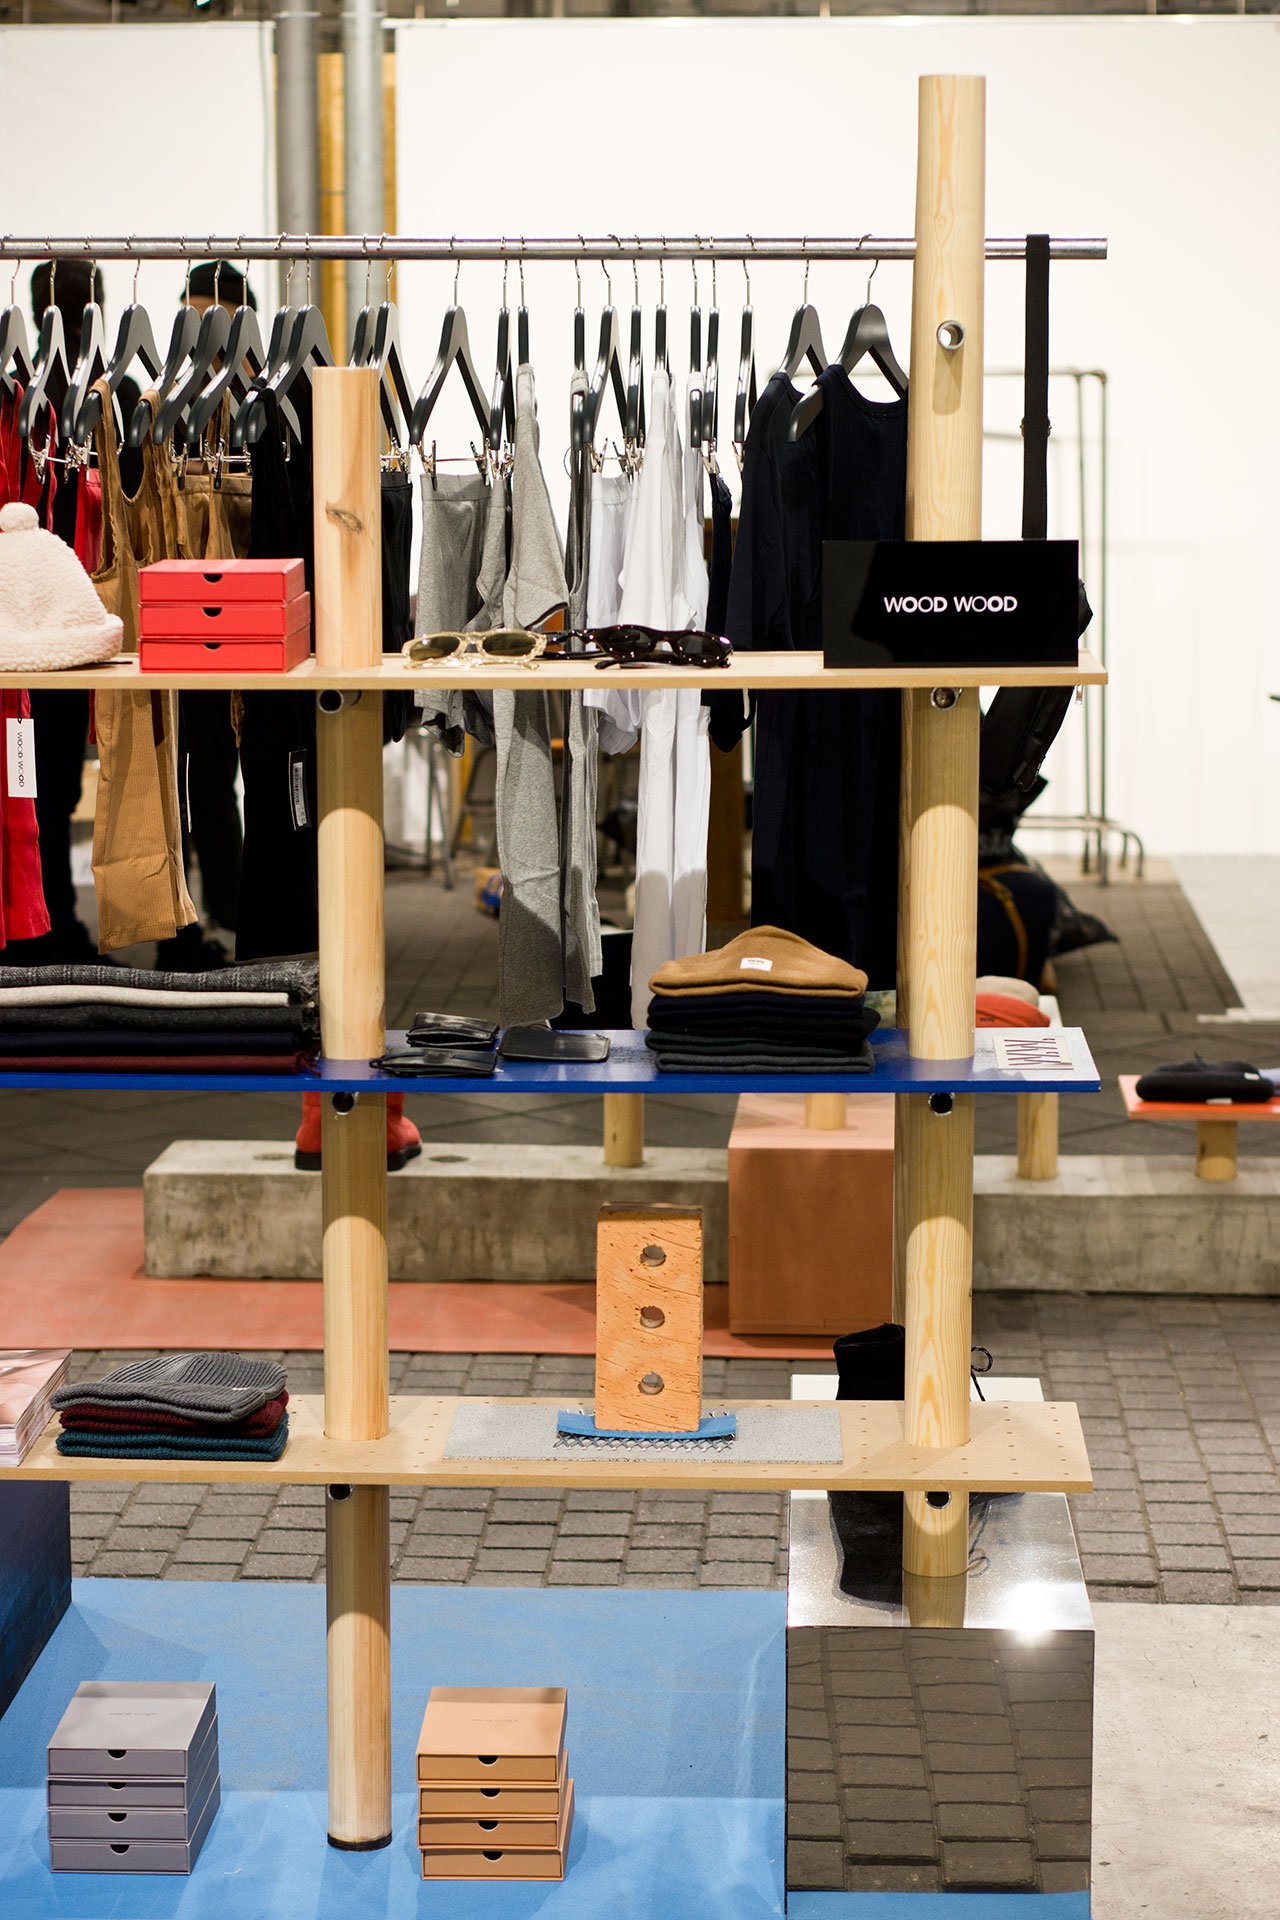 Wood Woods Trade Booth at Copenhagen Fashion Week by Spacon - X-38